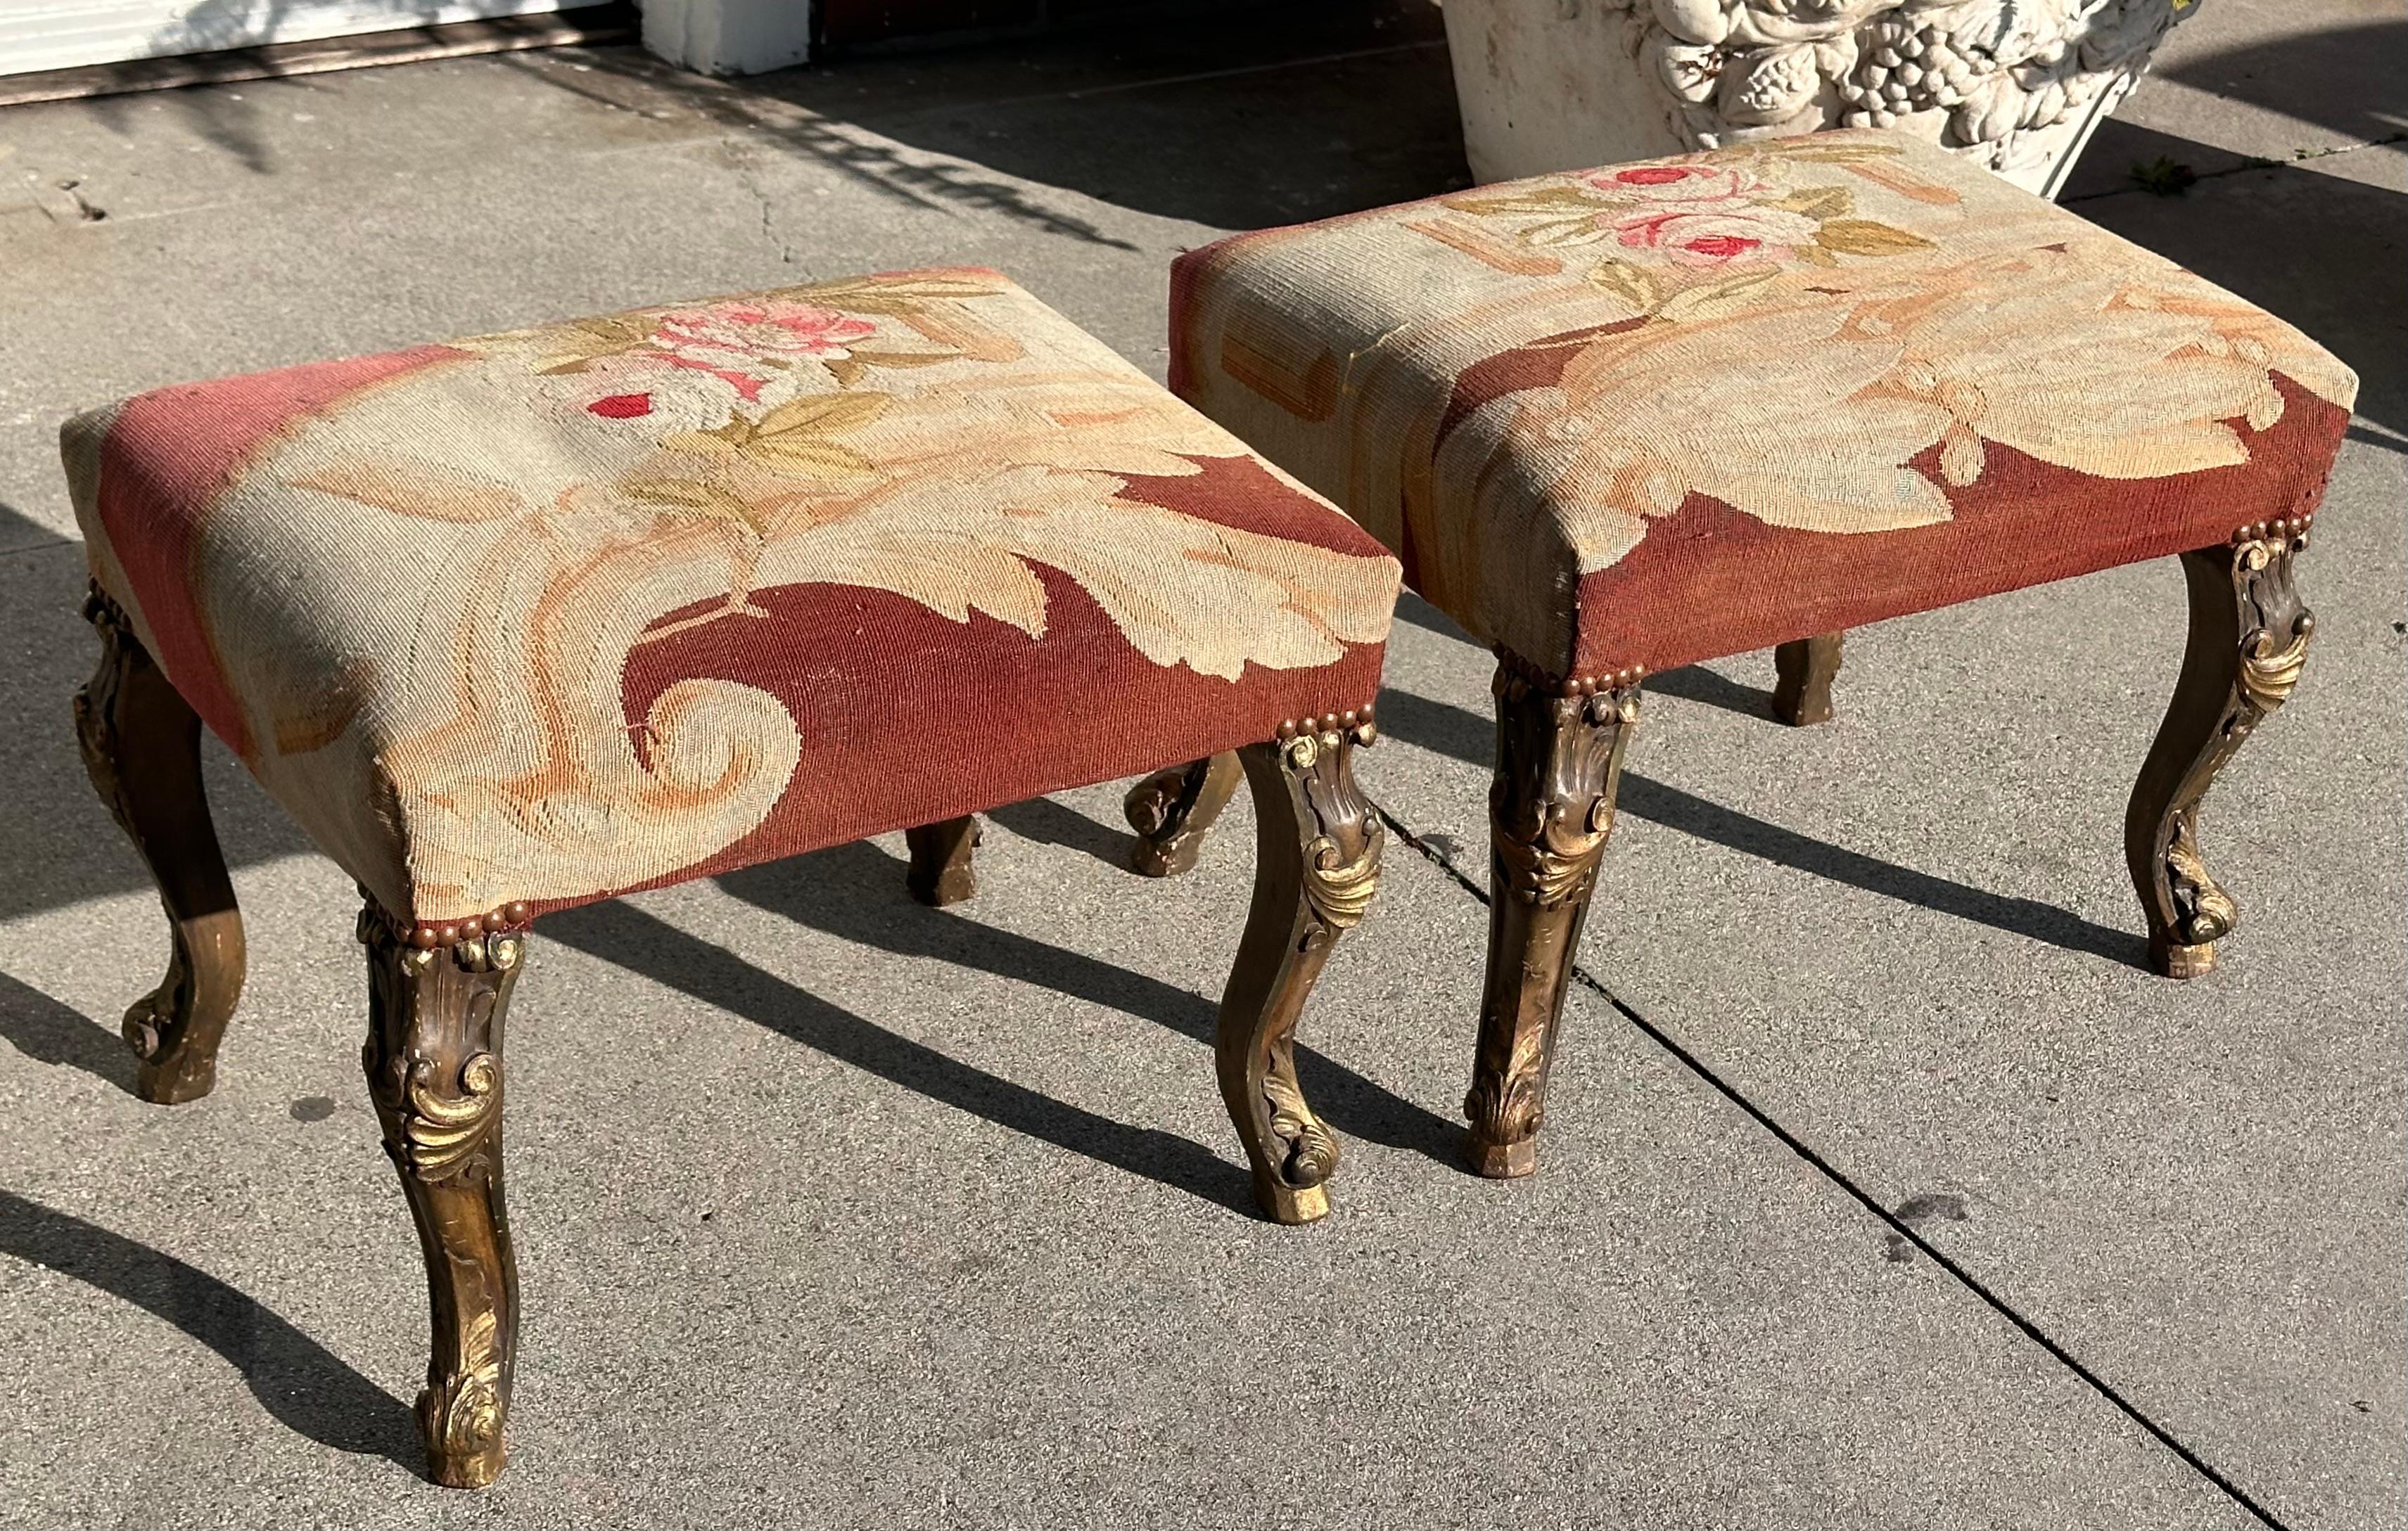 Pair of Antique Rococo Giltwood Stools W 18th C Aubusson Tapestry For Sale 3